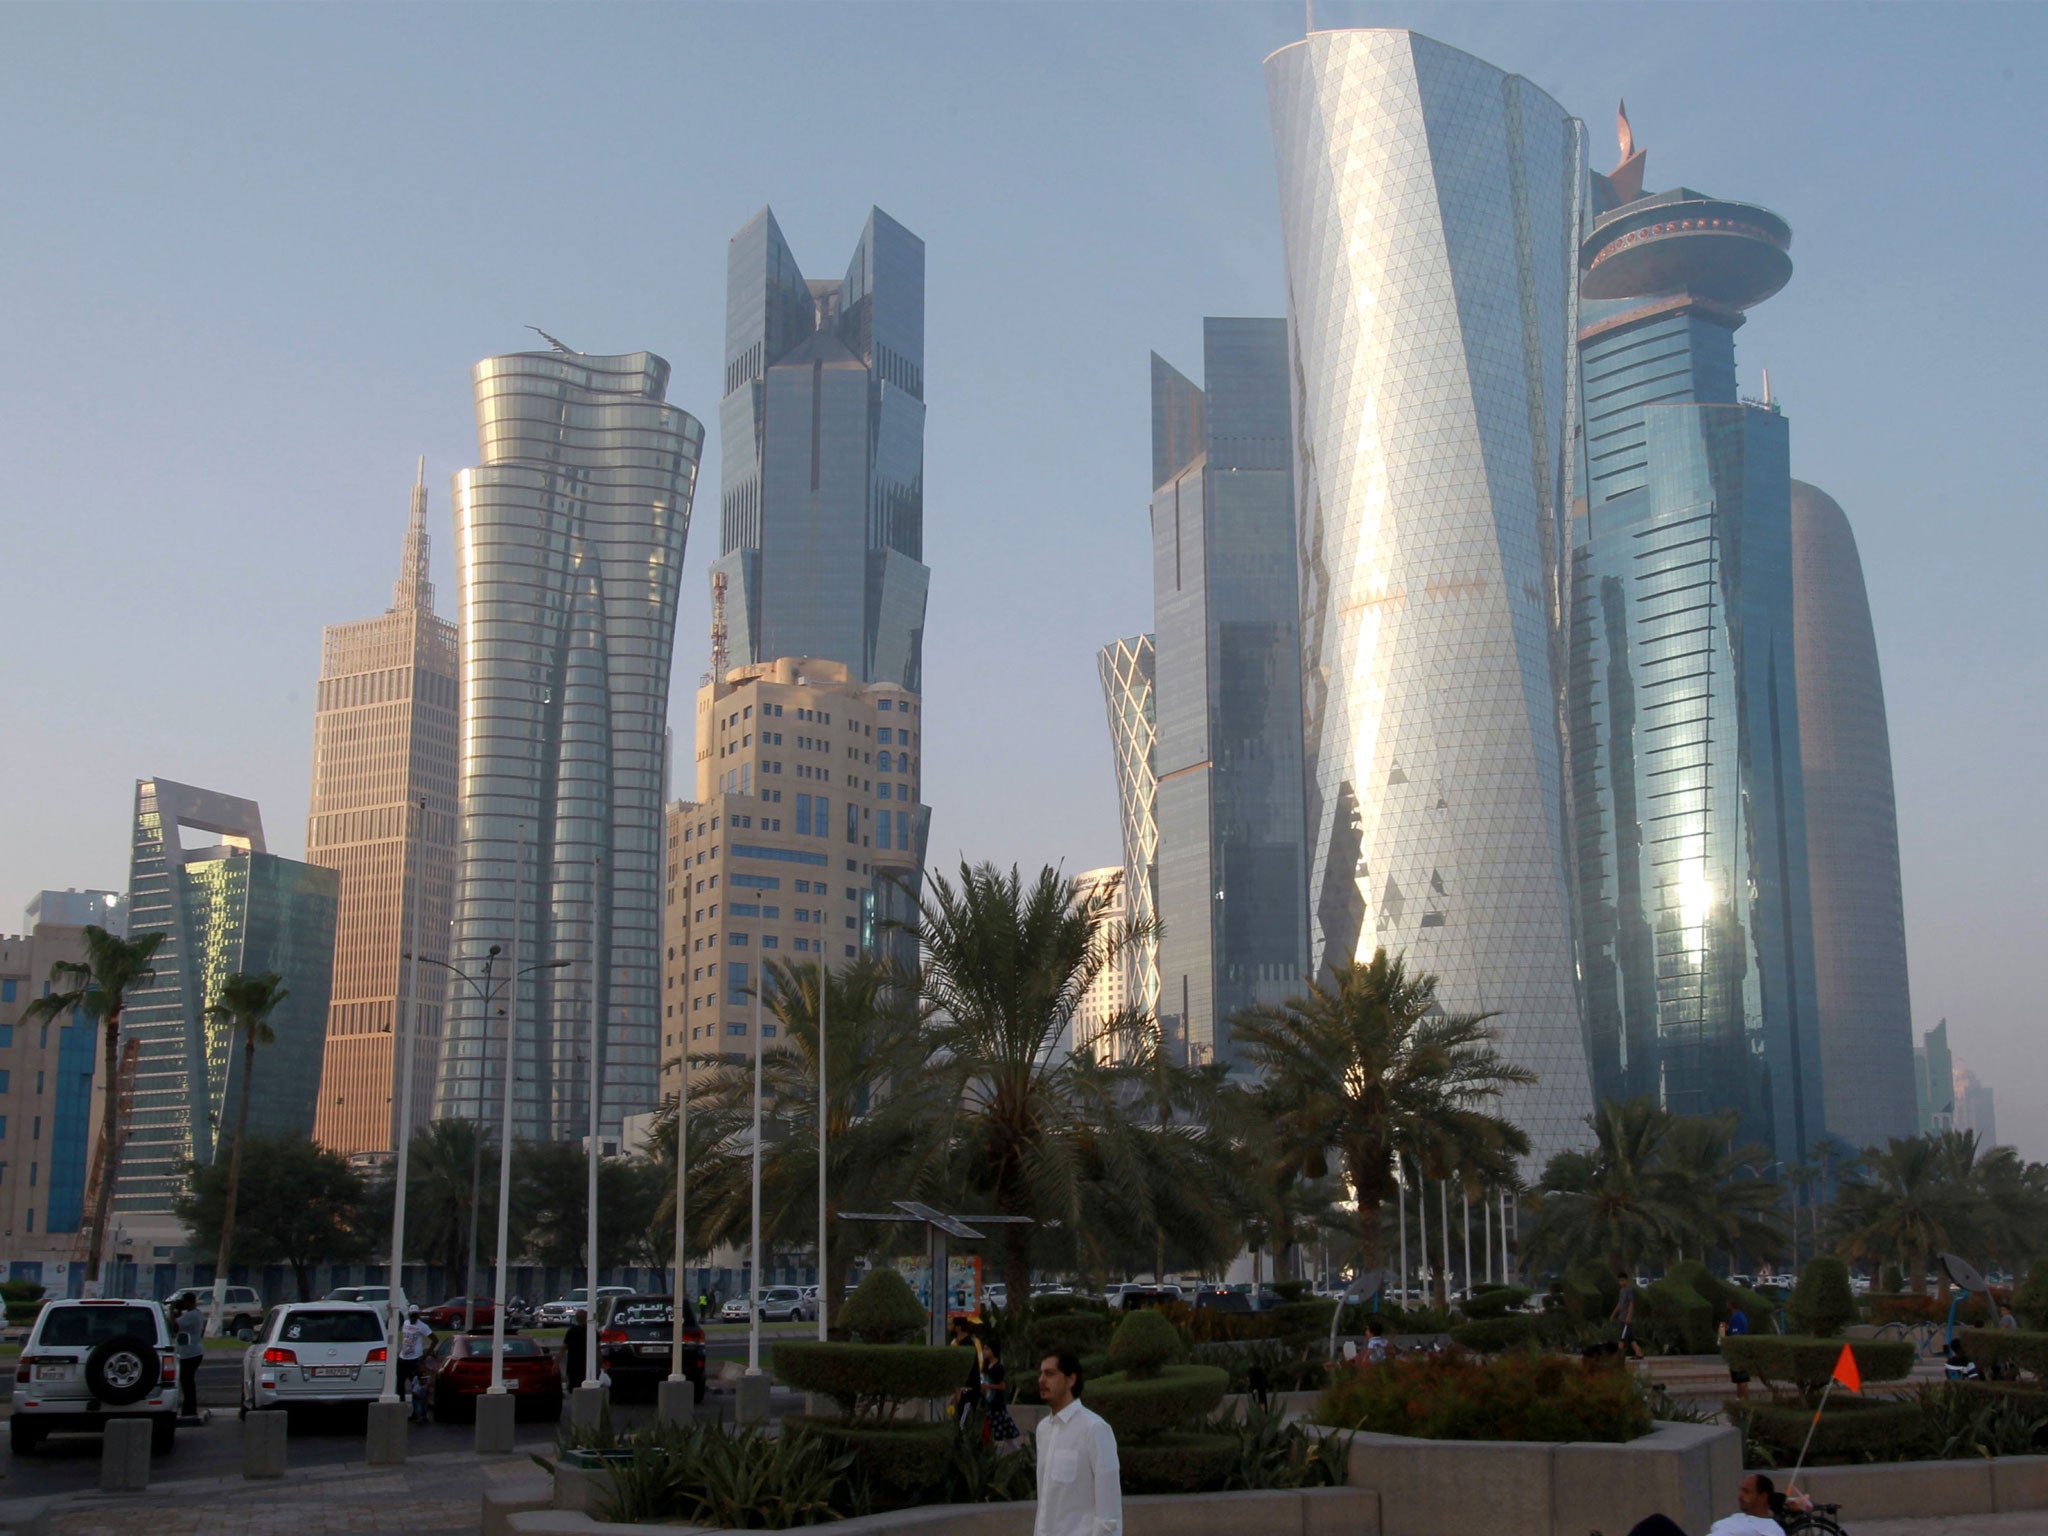 Saudi Arabia, the UAE, Bahrain and Egypt imposed sanctions on Qatar last month, accusing it of financing terrorist groups and allying with Iran